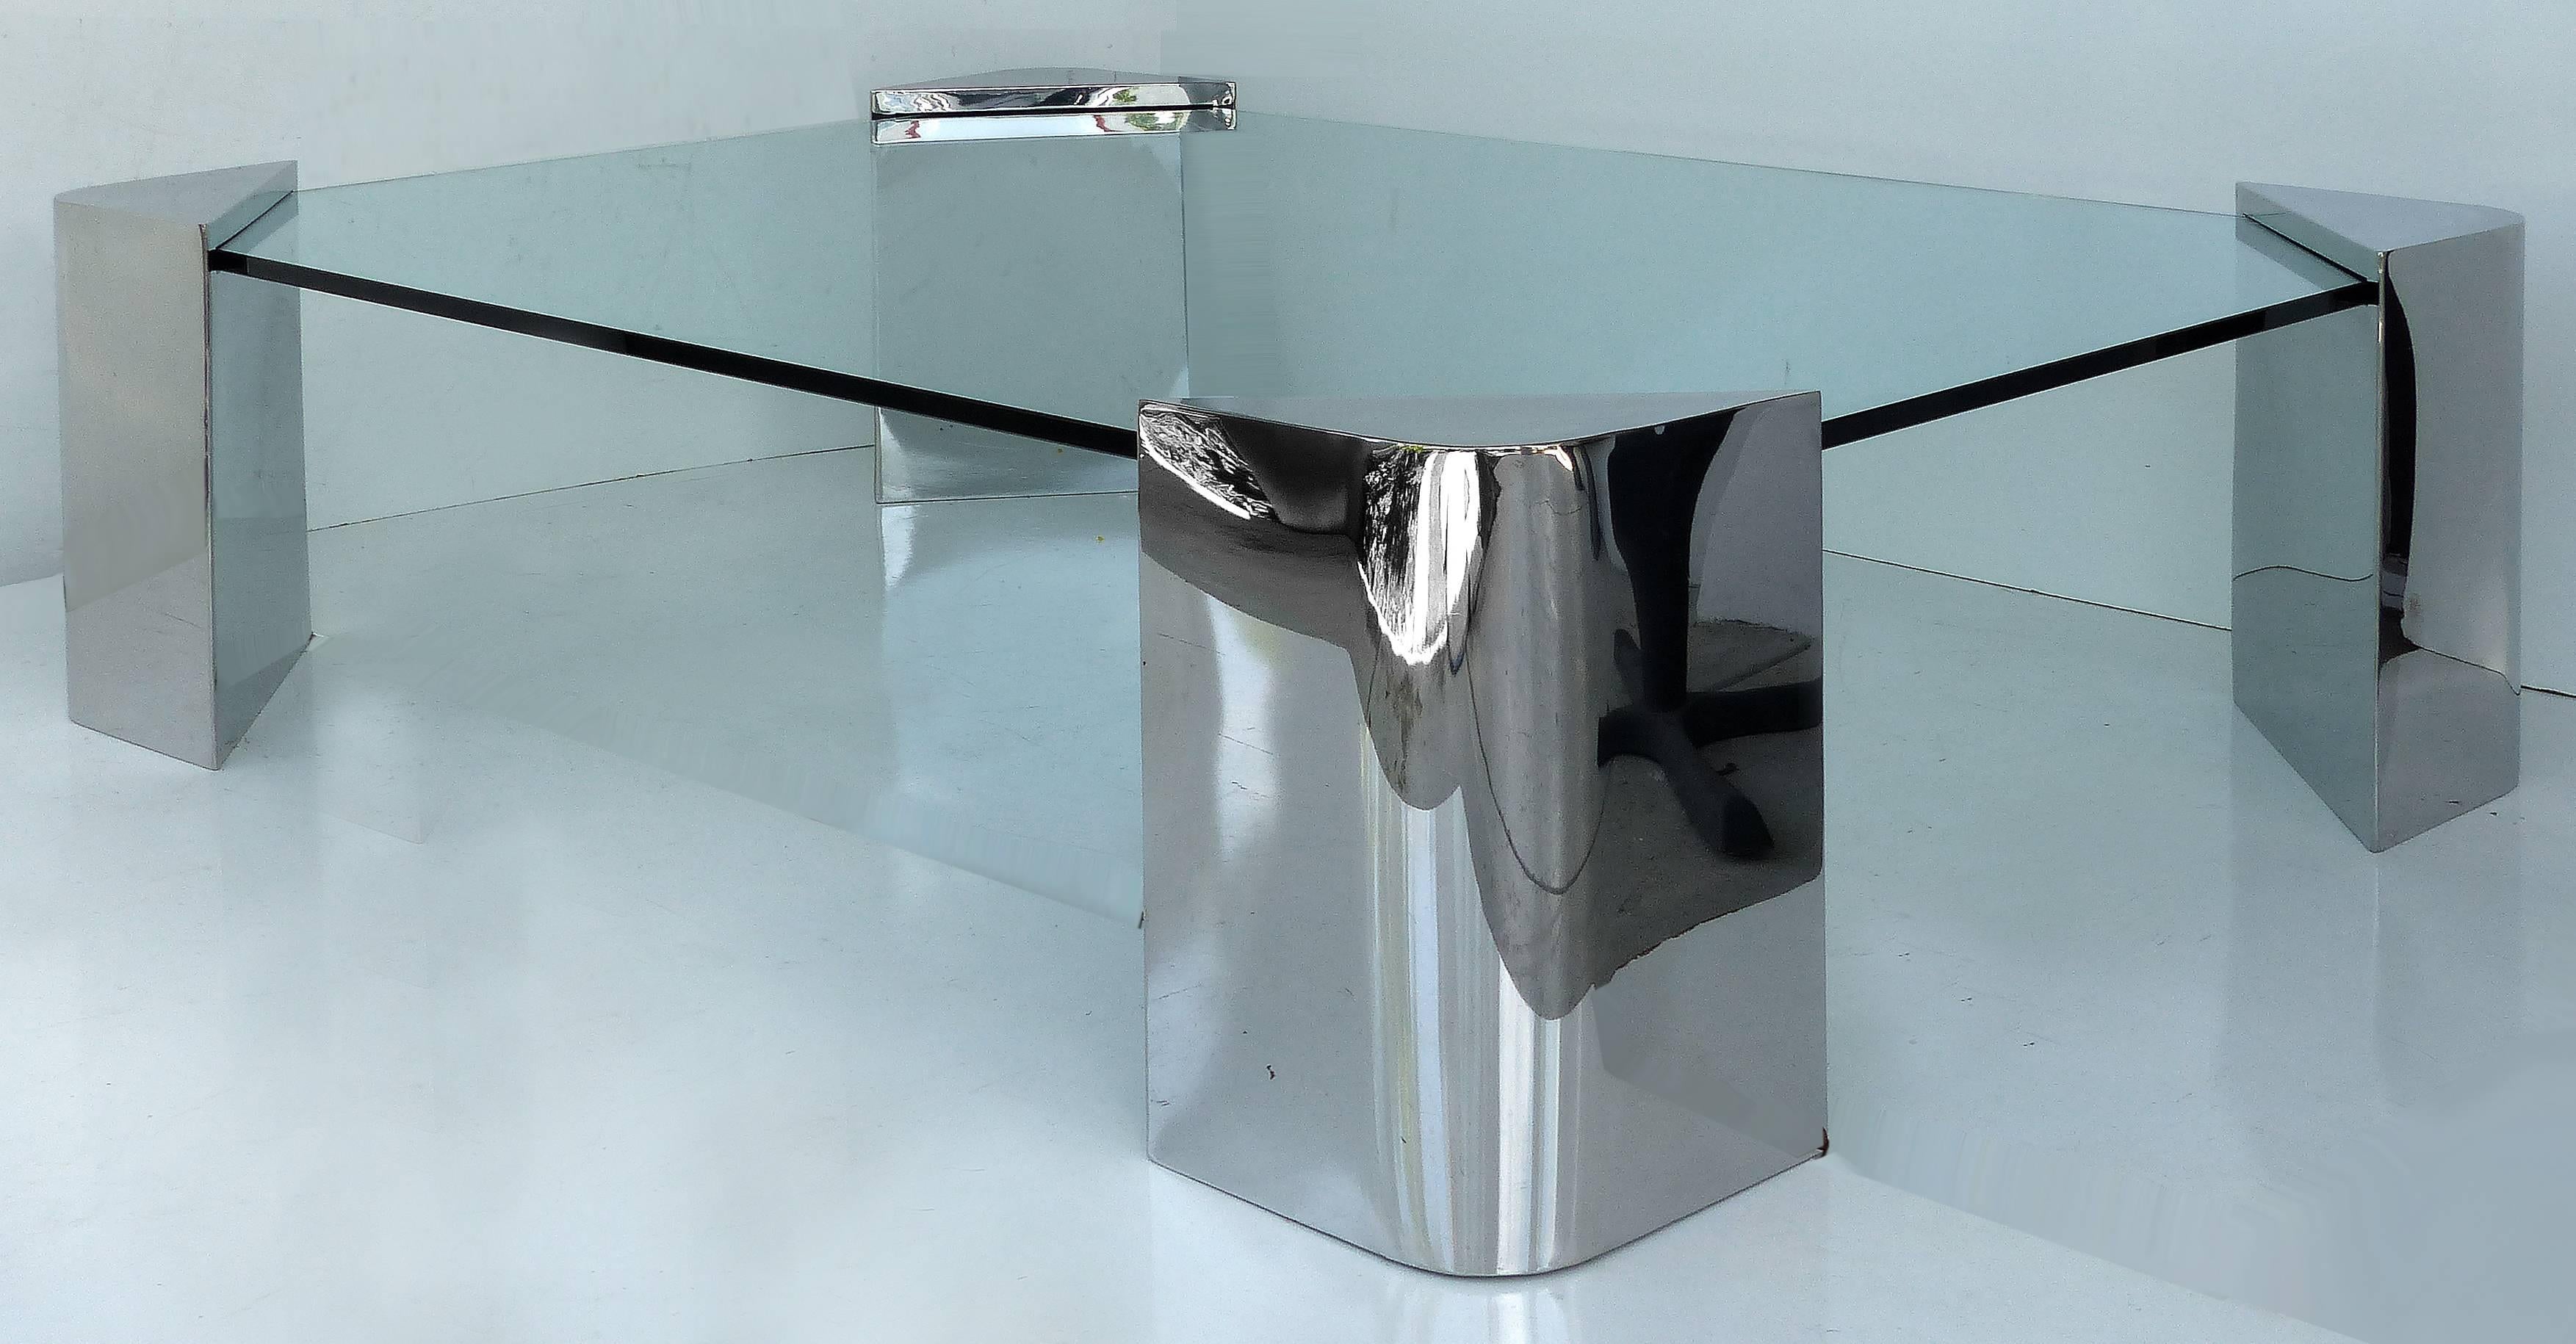 A large and substantial polished stainless steel and glass coffee table attributed to Karl Springer. Four stainless steel triangular corners supporting a 3/4" floating glass surface with a height of 18". In excellent vintage condition. The